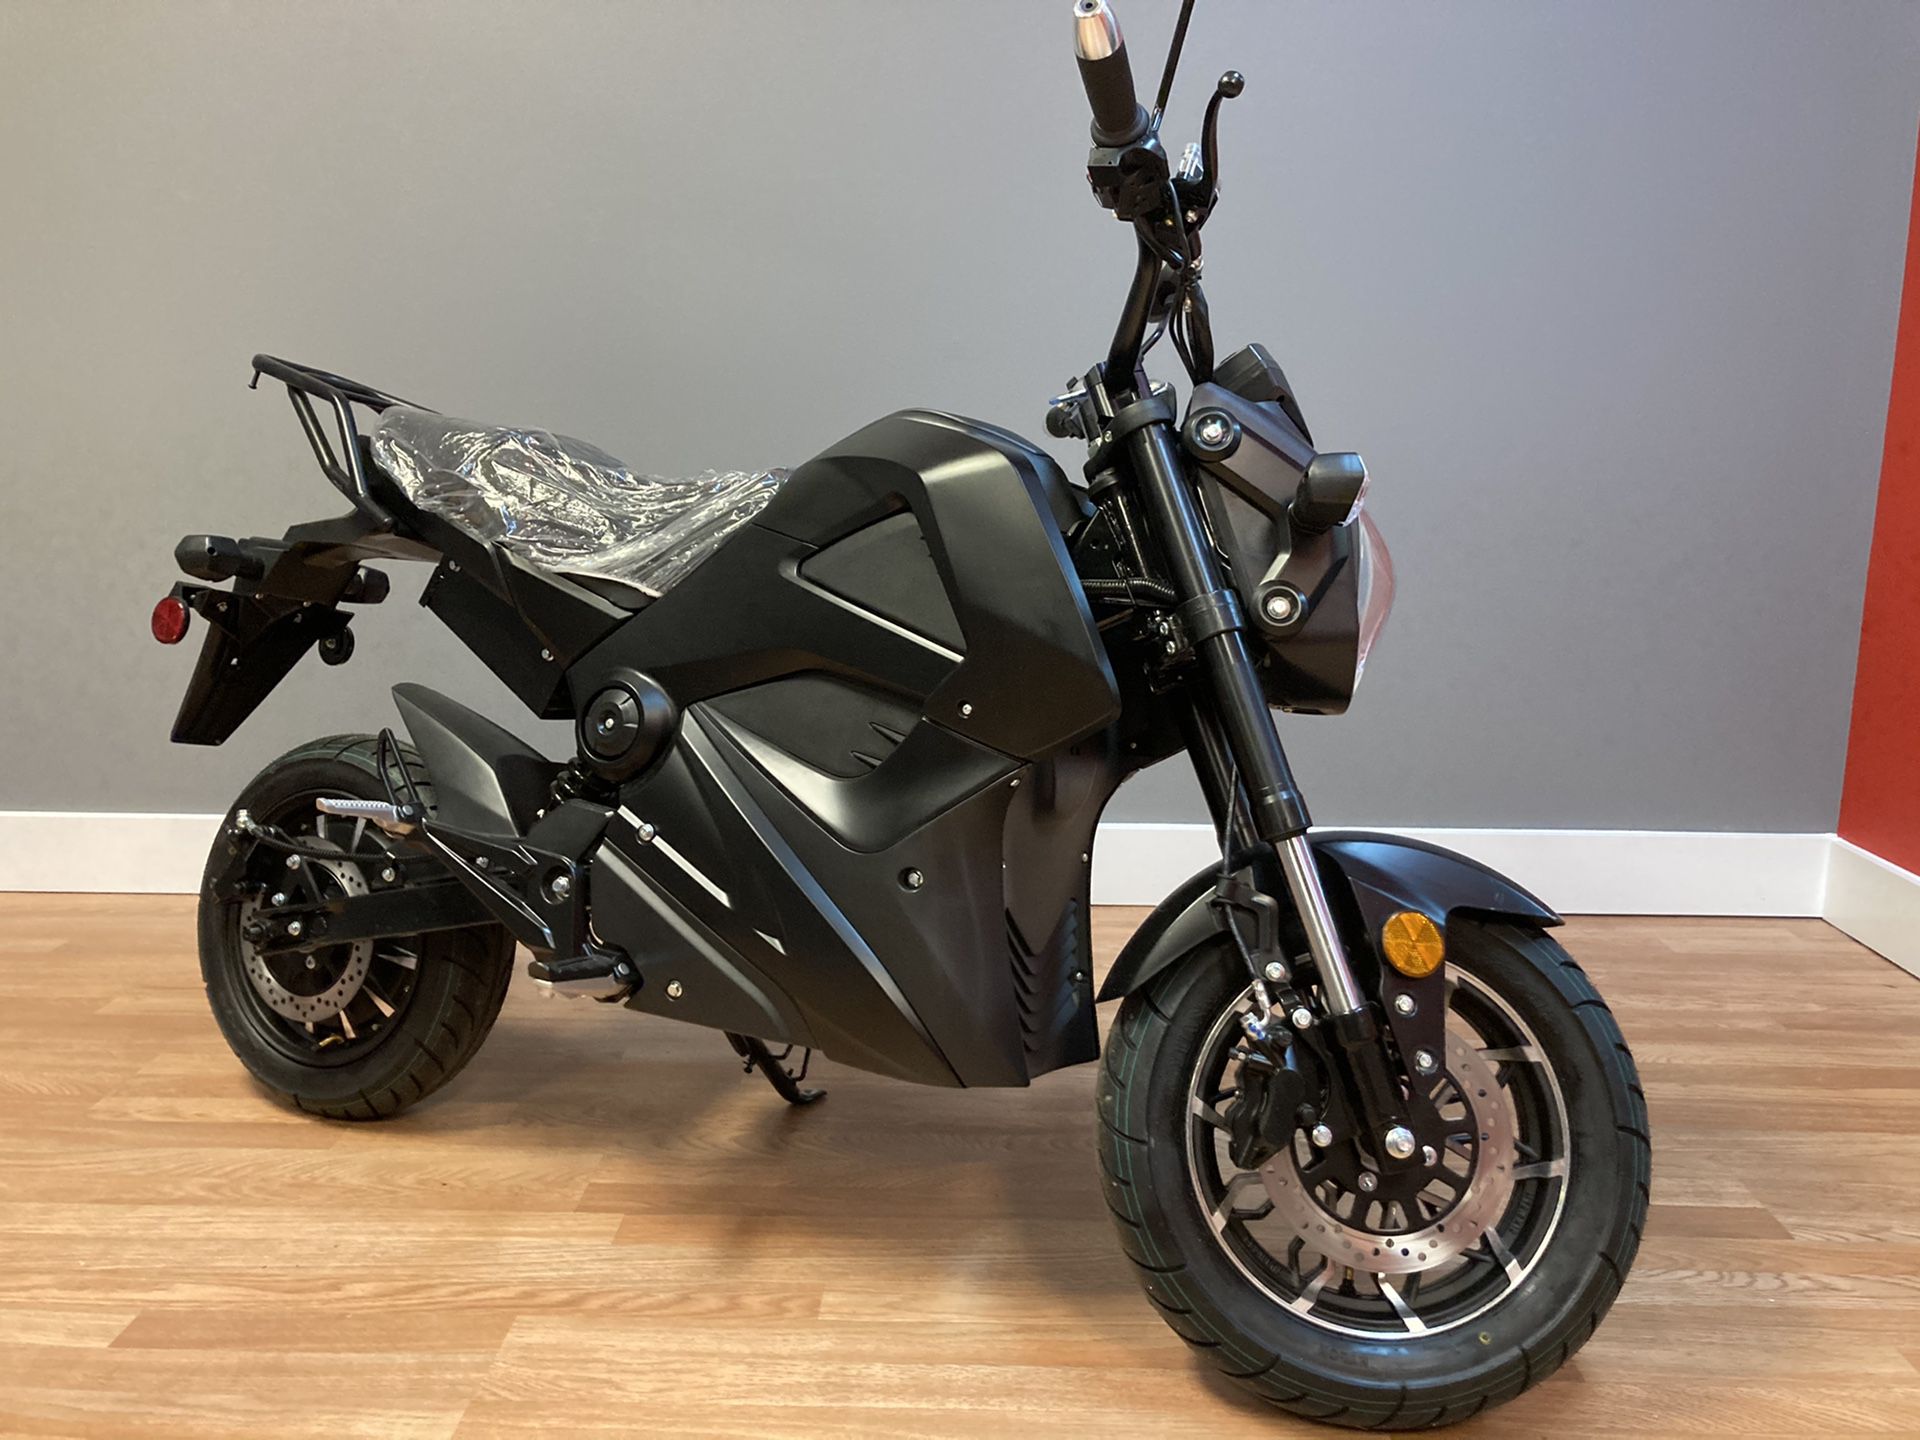 New 2020 E-Knight Train Electric Street Legal Motorcycle